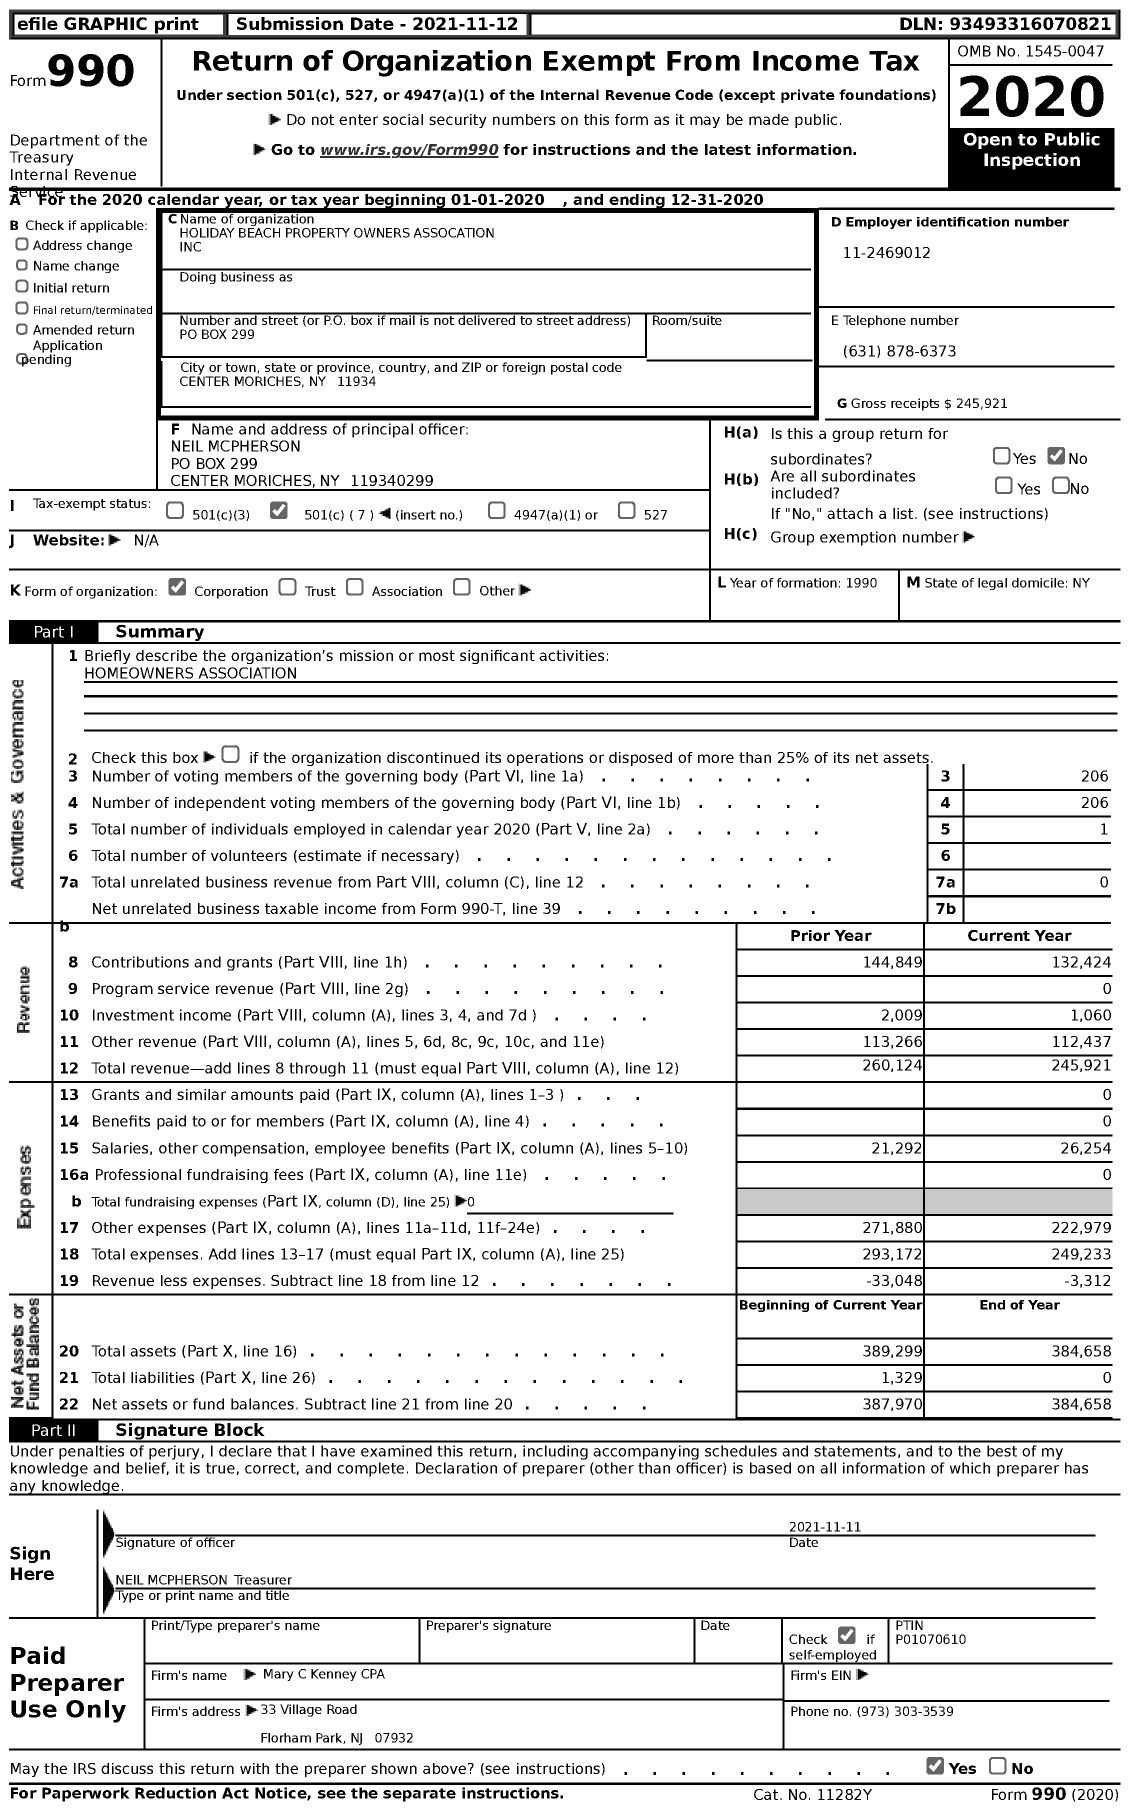 Image of first page of 2020 Form 990 for Holiday Beach Property Owners Association